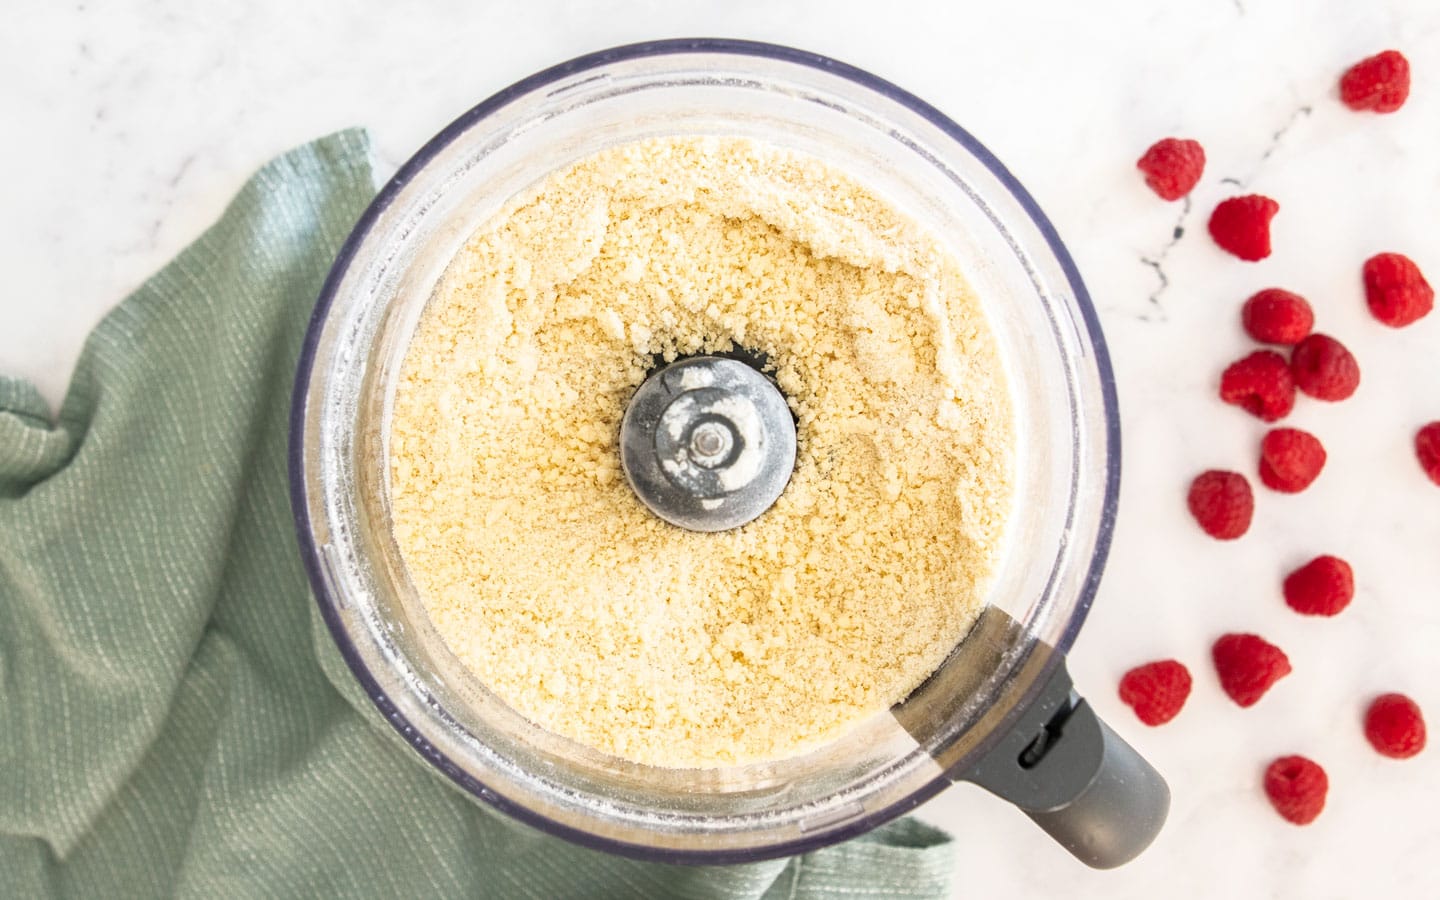 The flour, sugar, butter and egg combined in a food processor until it looks like breadcrumbs.